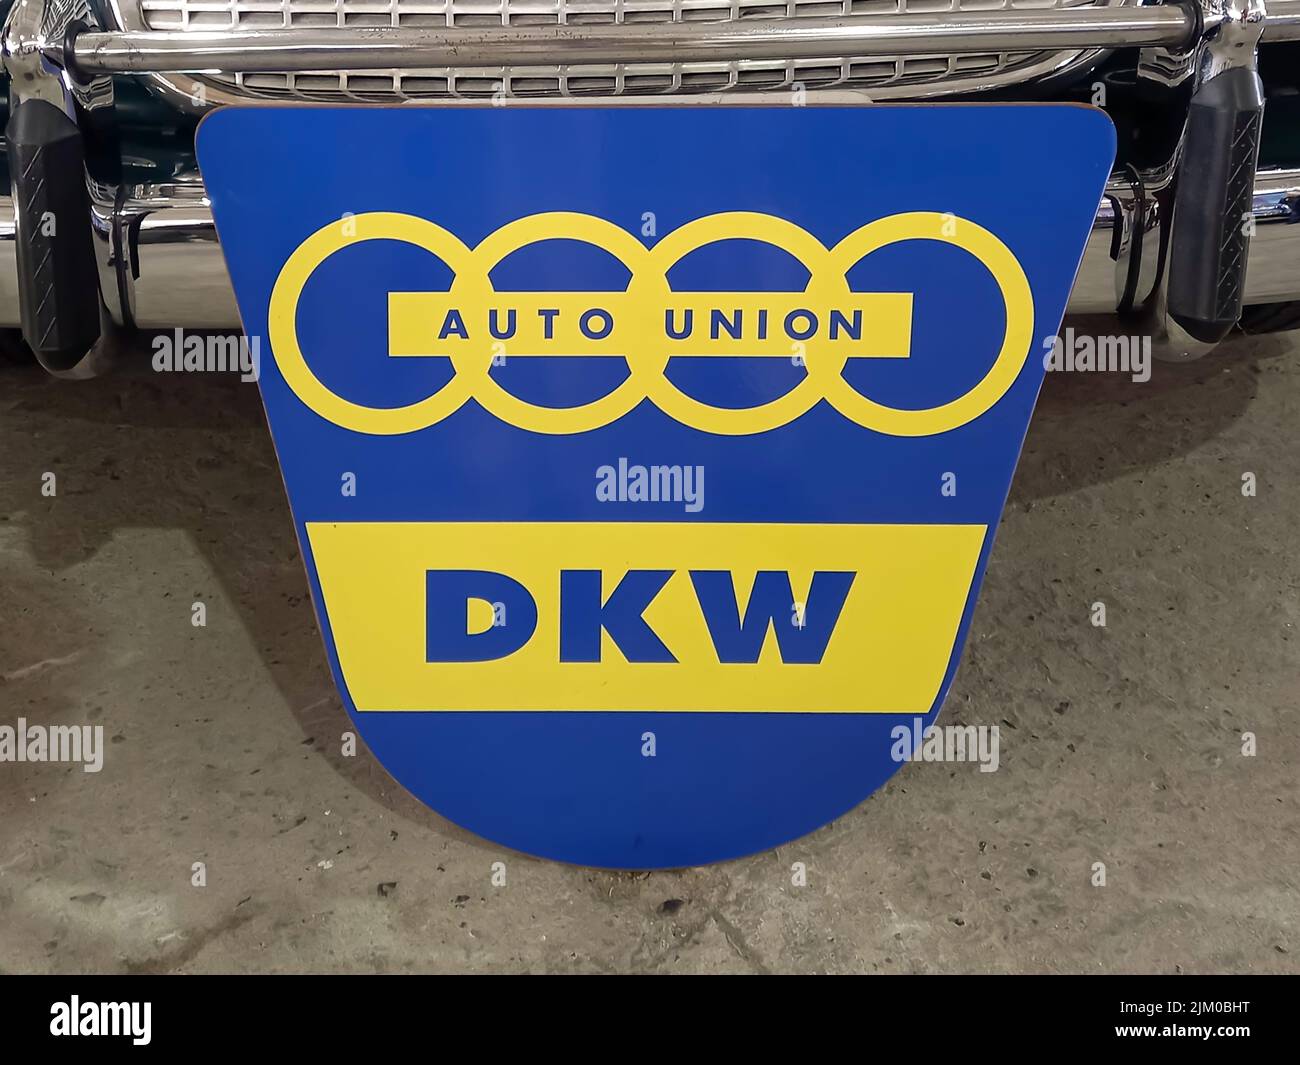 Avellaneda, Argentina - Apr 3, 2022: Old blue and yellow Auto Union DKW sign emblem logo and branding 1960s. Stock Photo